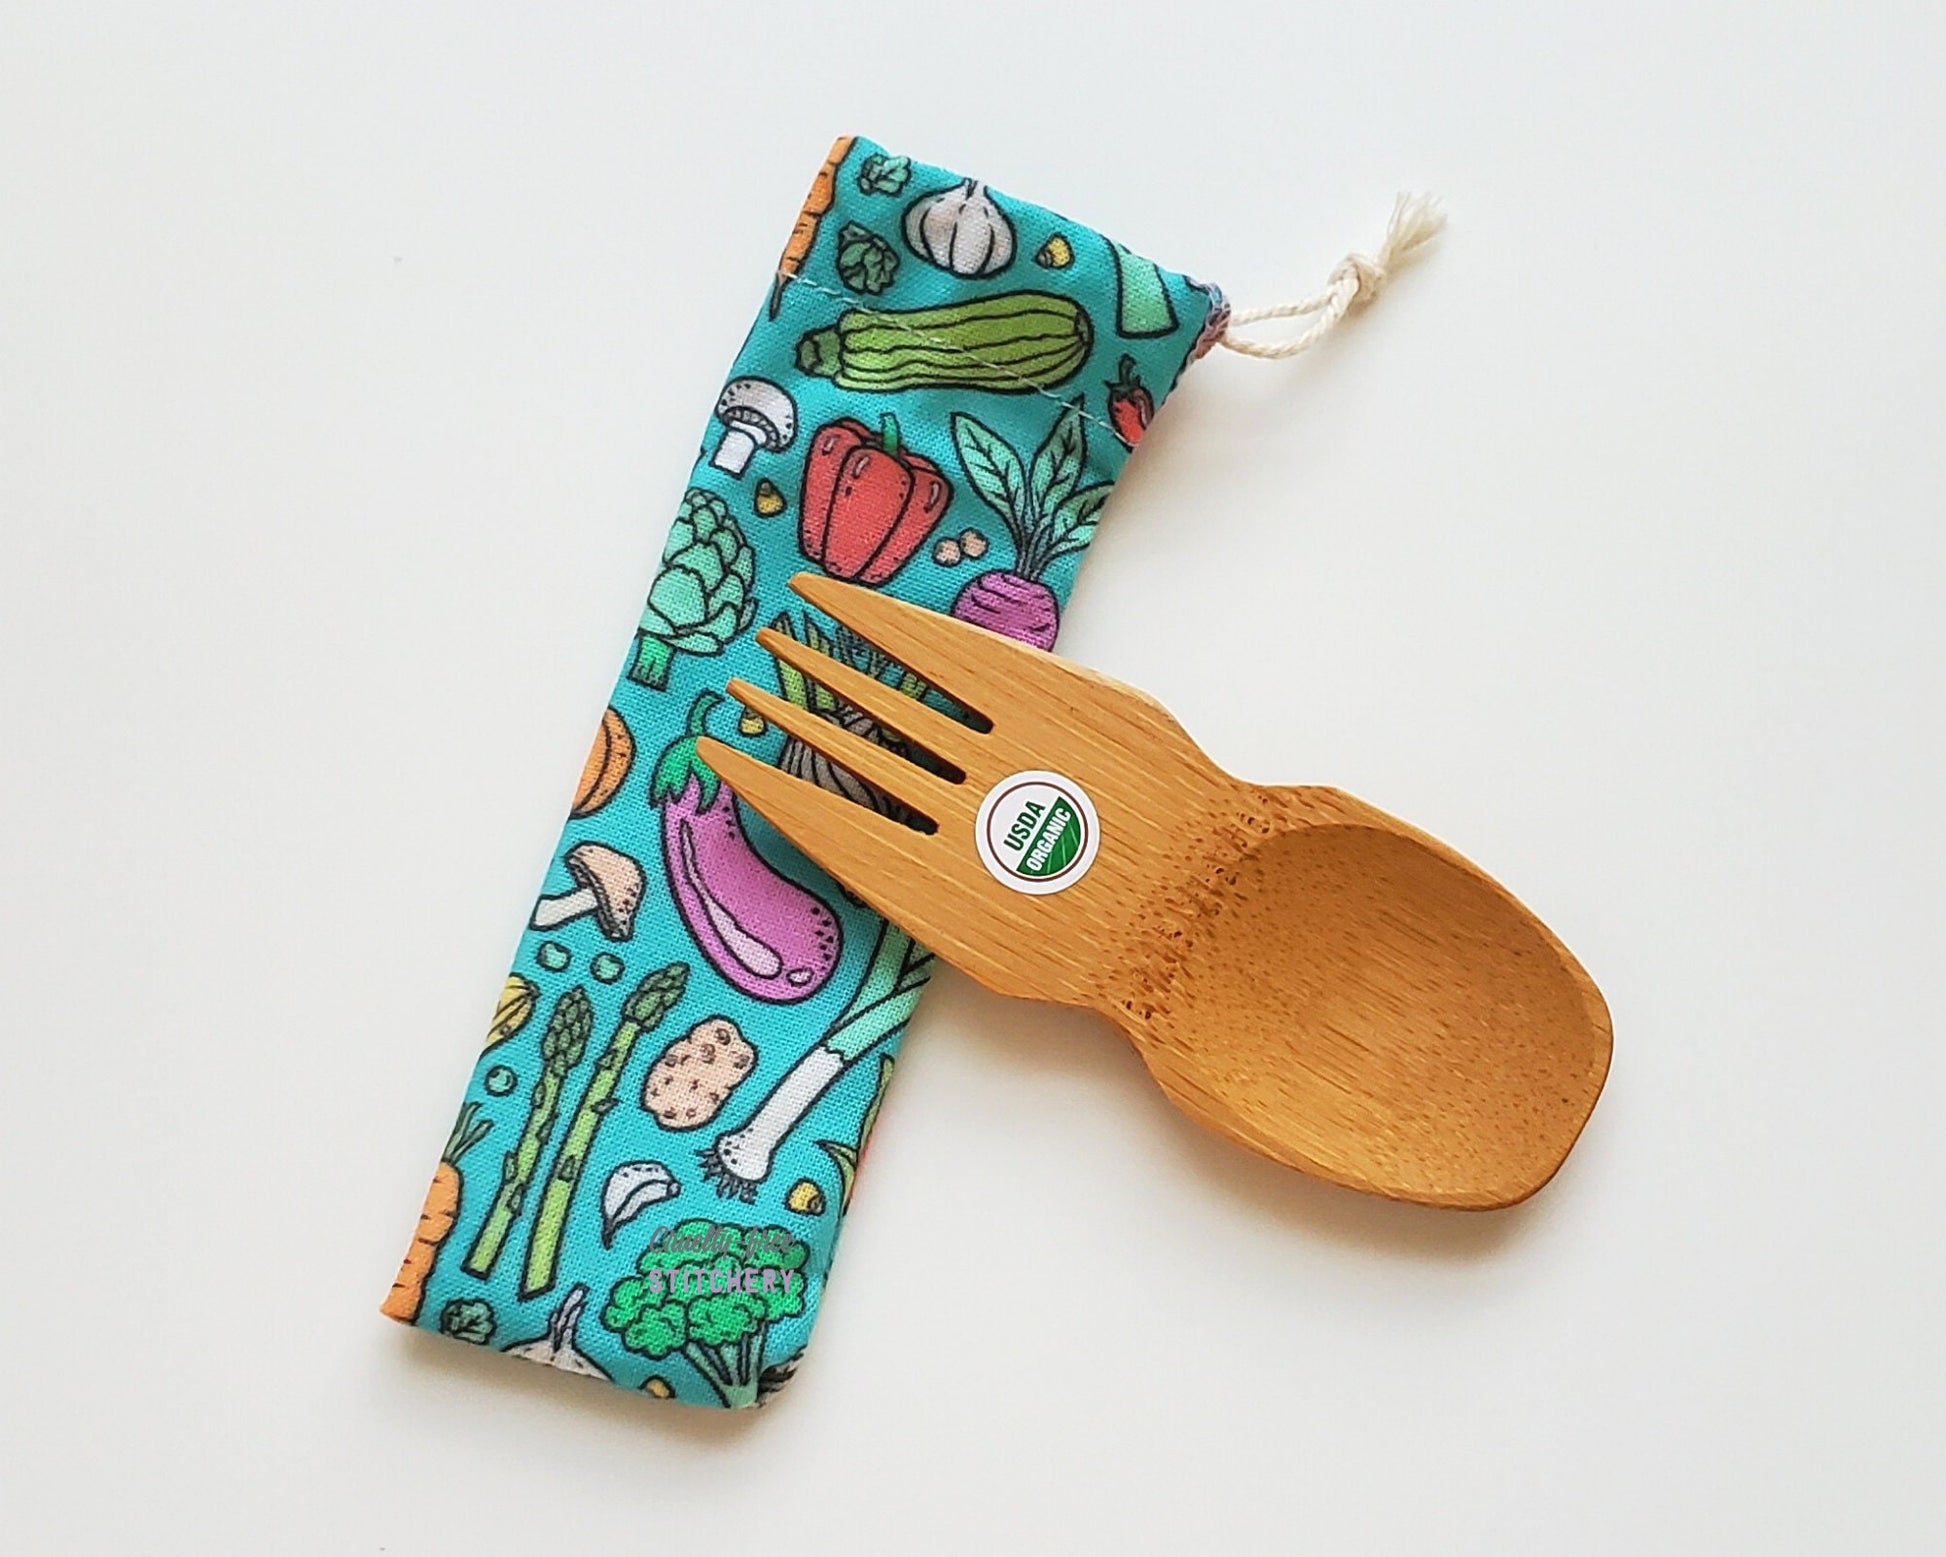 Veggie print reusable spork pouch. The pouch is sitting diagonally with the spork partially on top pointing the other way. The fork end of the spork is pointing to the left.